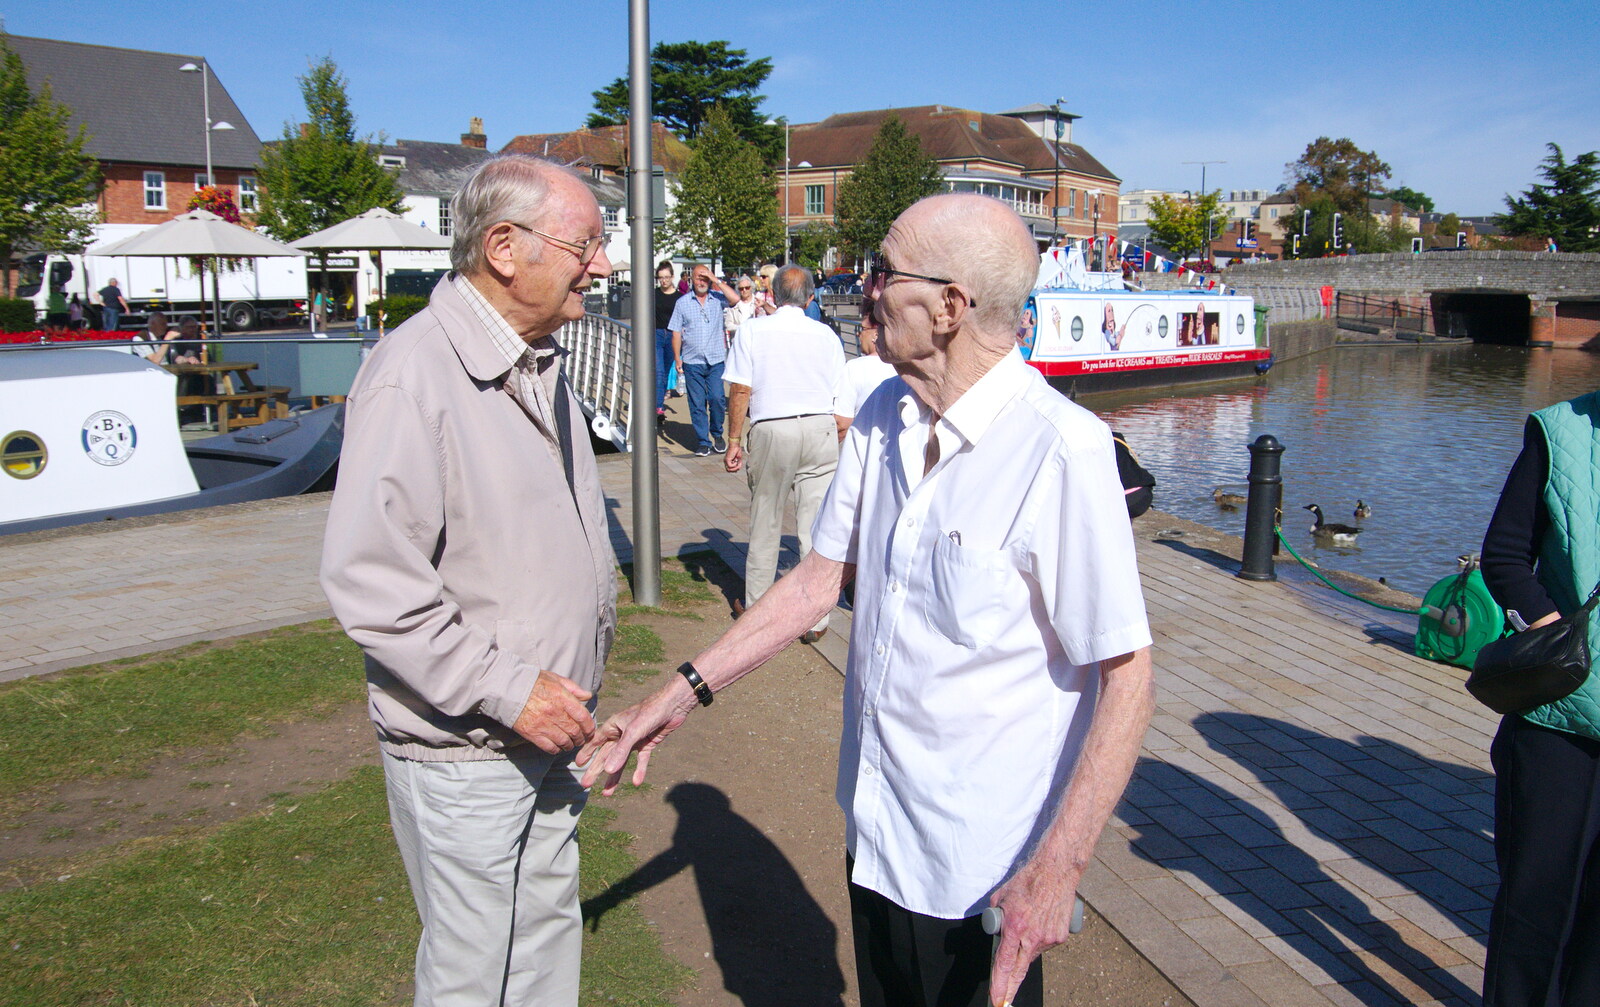 Grandad meets another RAF buddy from A Boat Trip on the River, Stratford upon Avon, Warwickshire - 14th September 2019